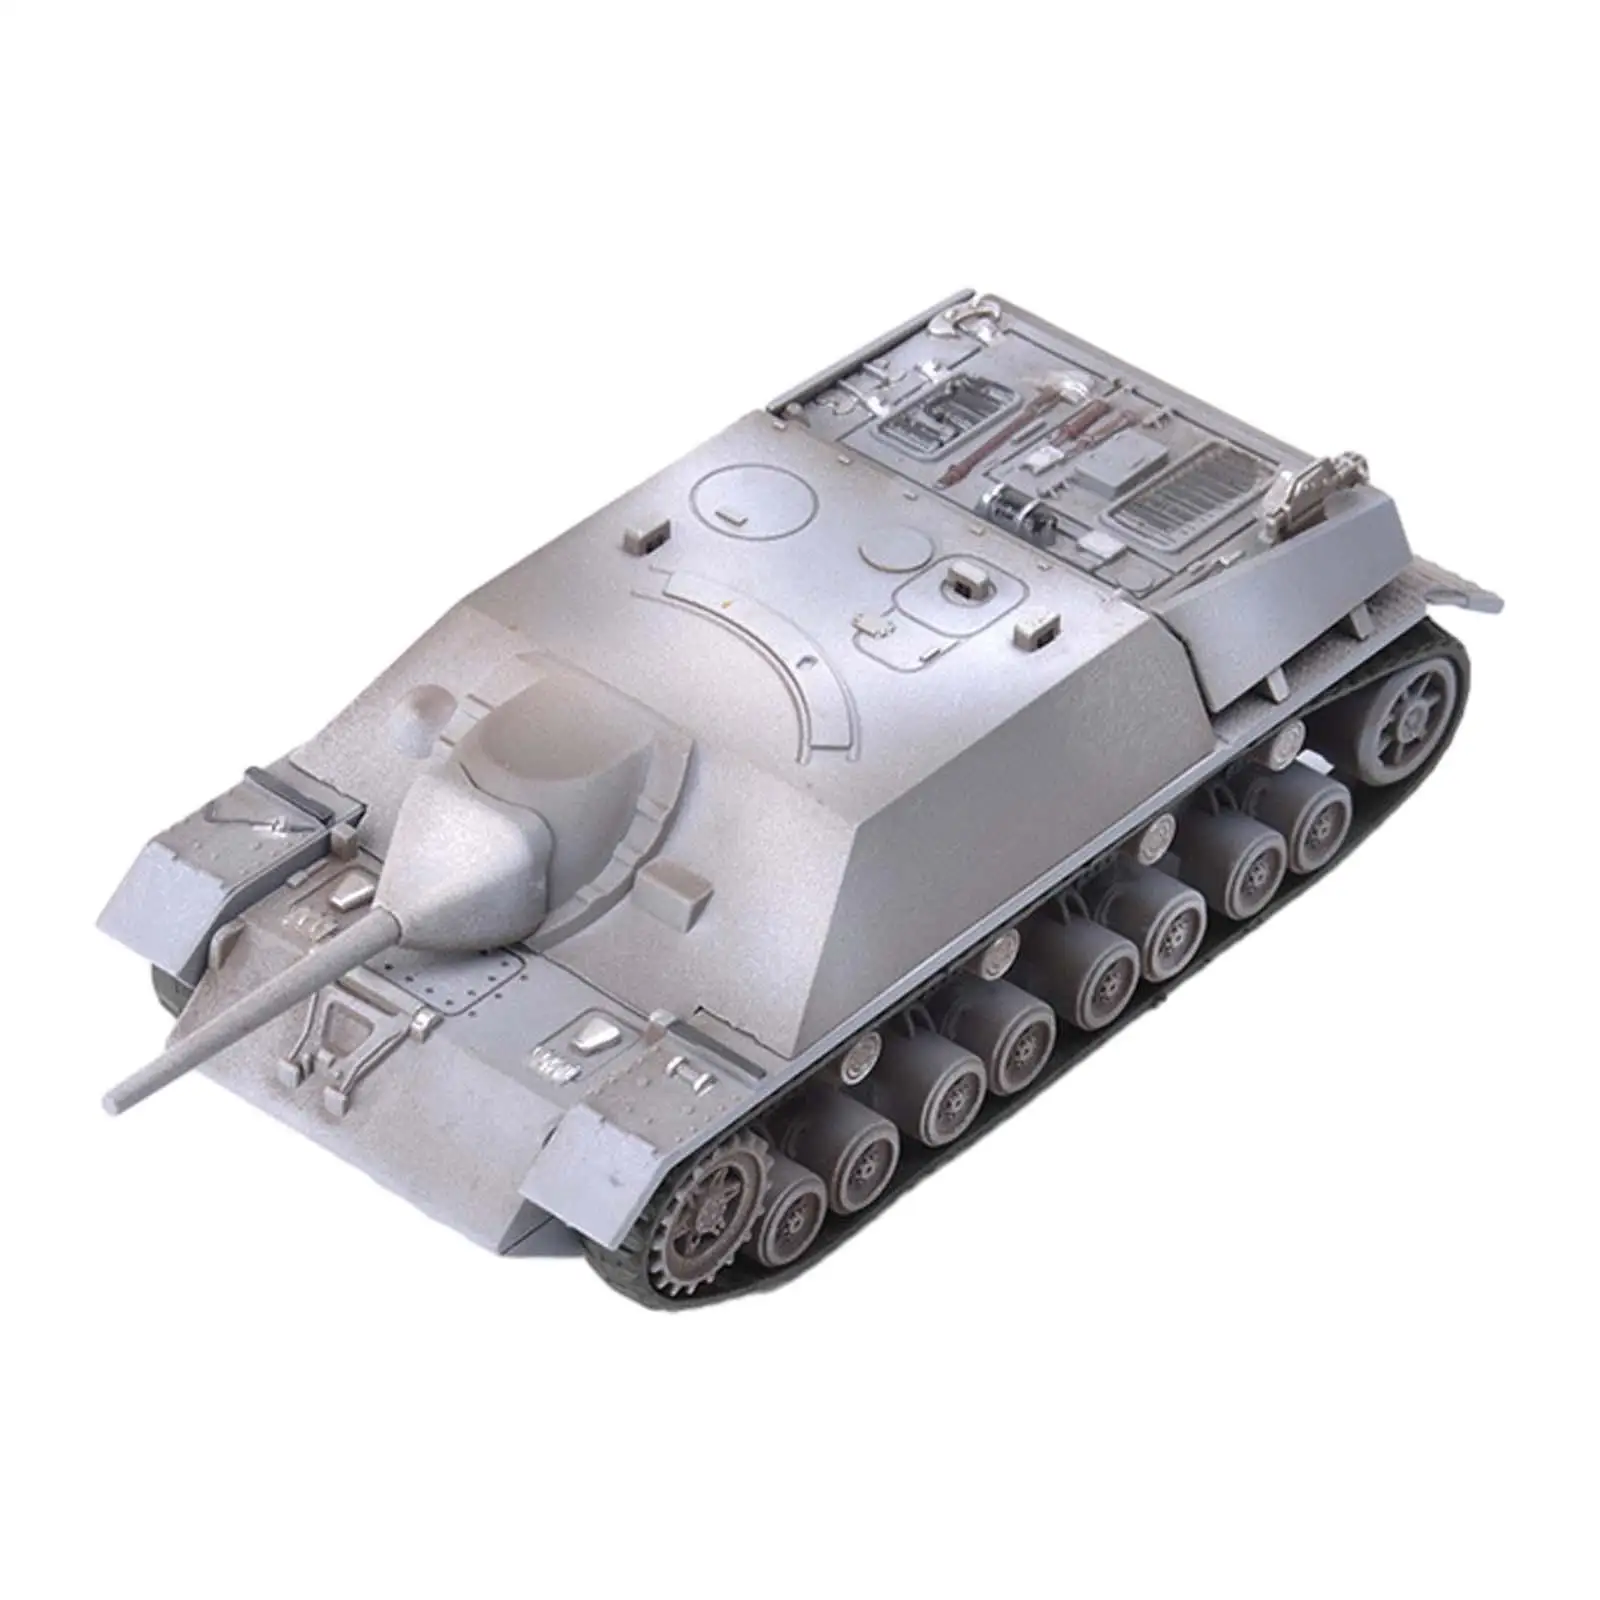 1/72 Tank Model Puzzle Vehicle Tank Model Toy DIY Assemble Collection Miniature Tank Building Kits for Boy Kids Birthday Gift